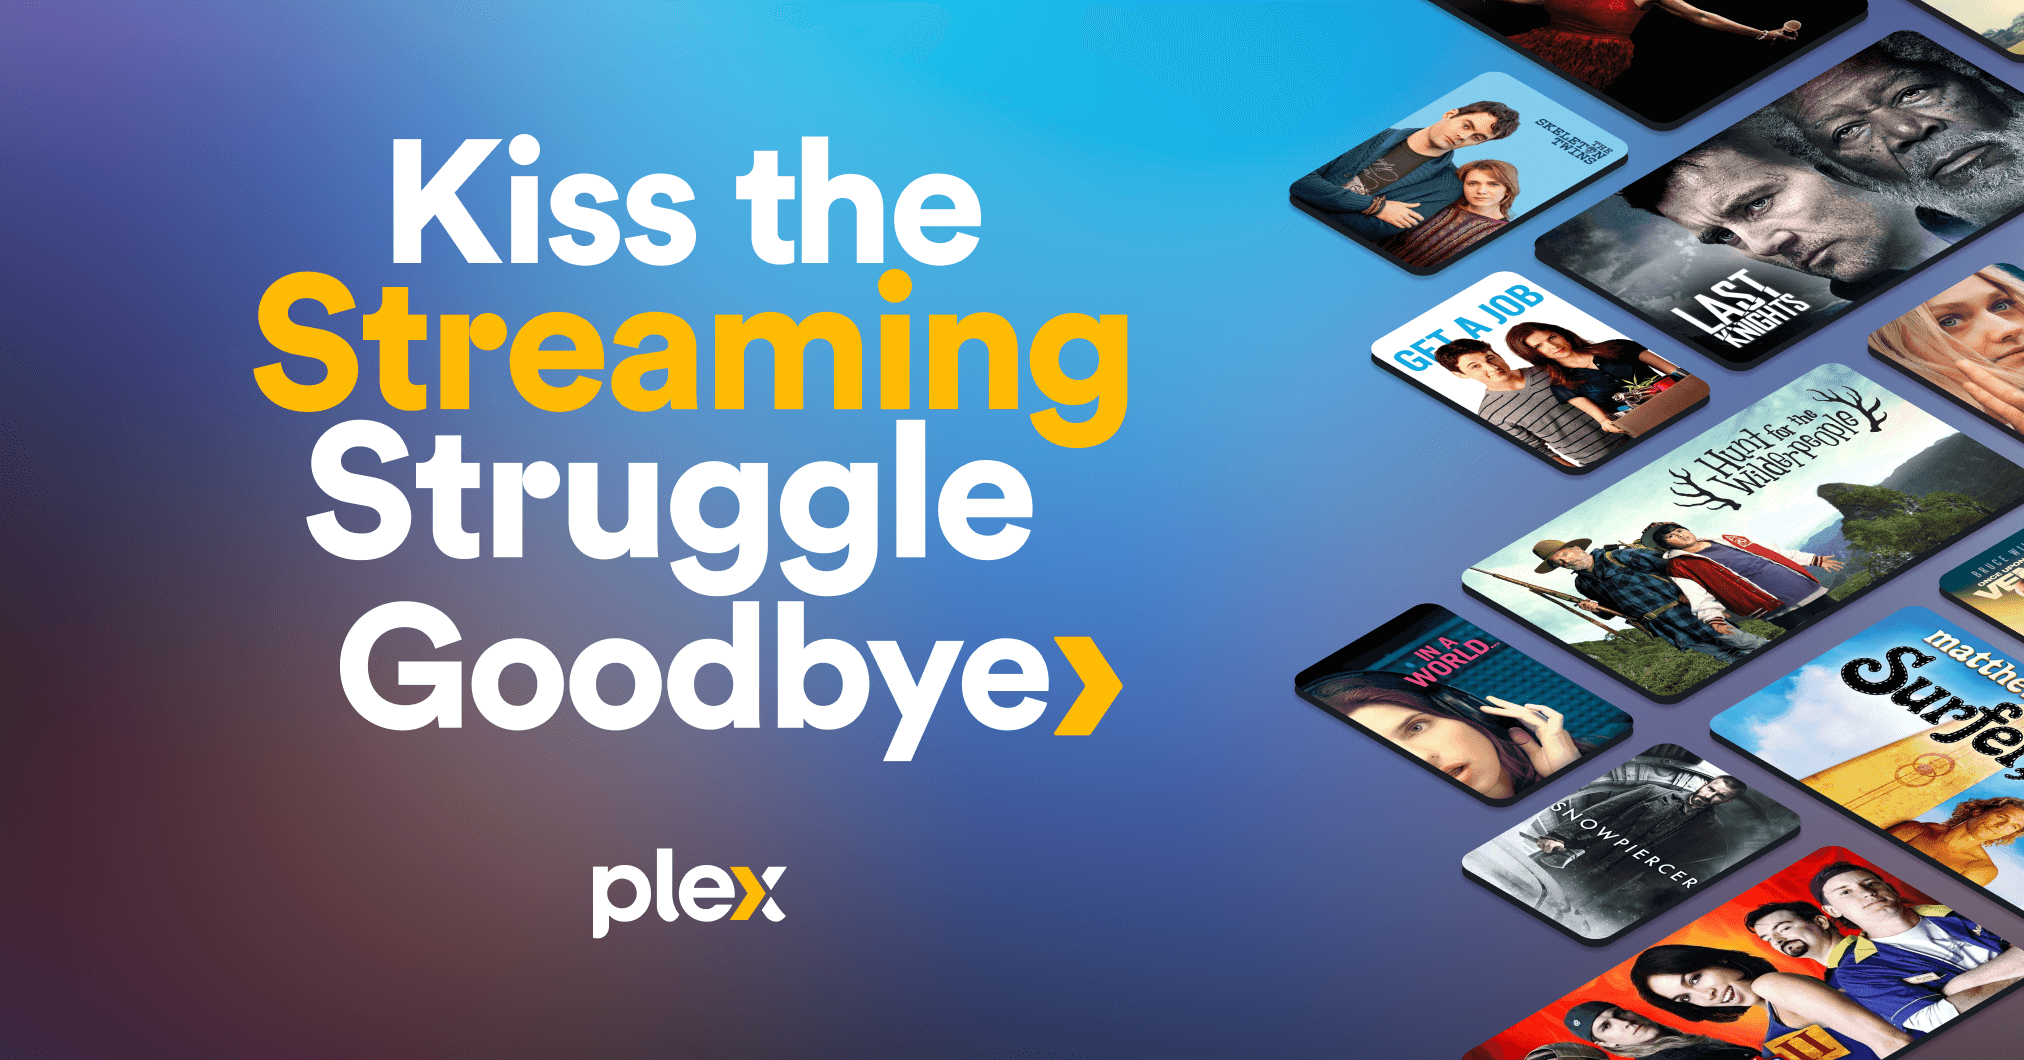 Search less, watch more with Plex.